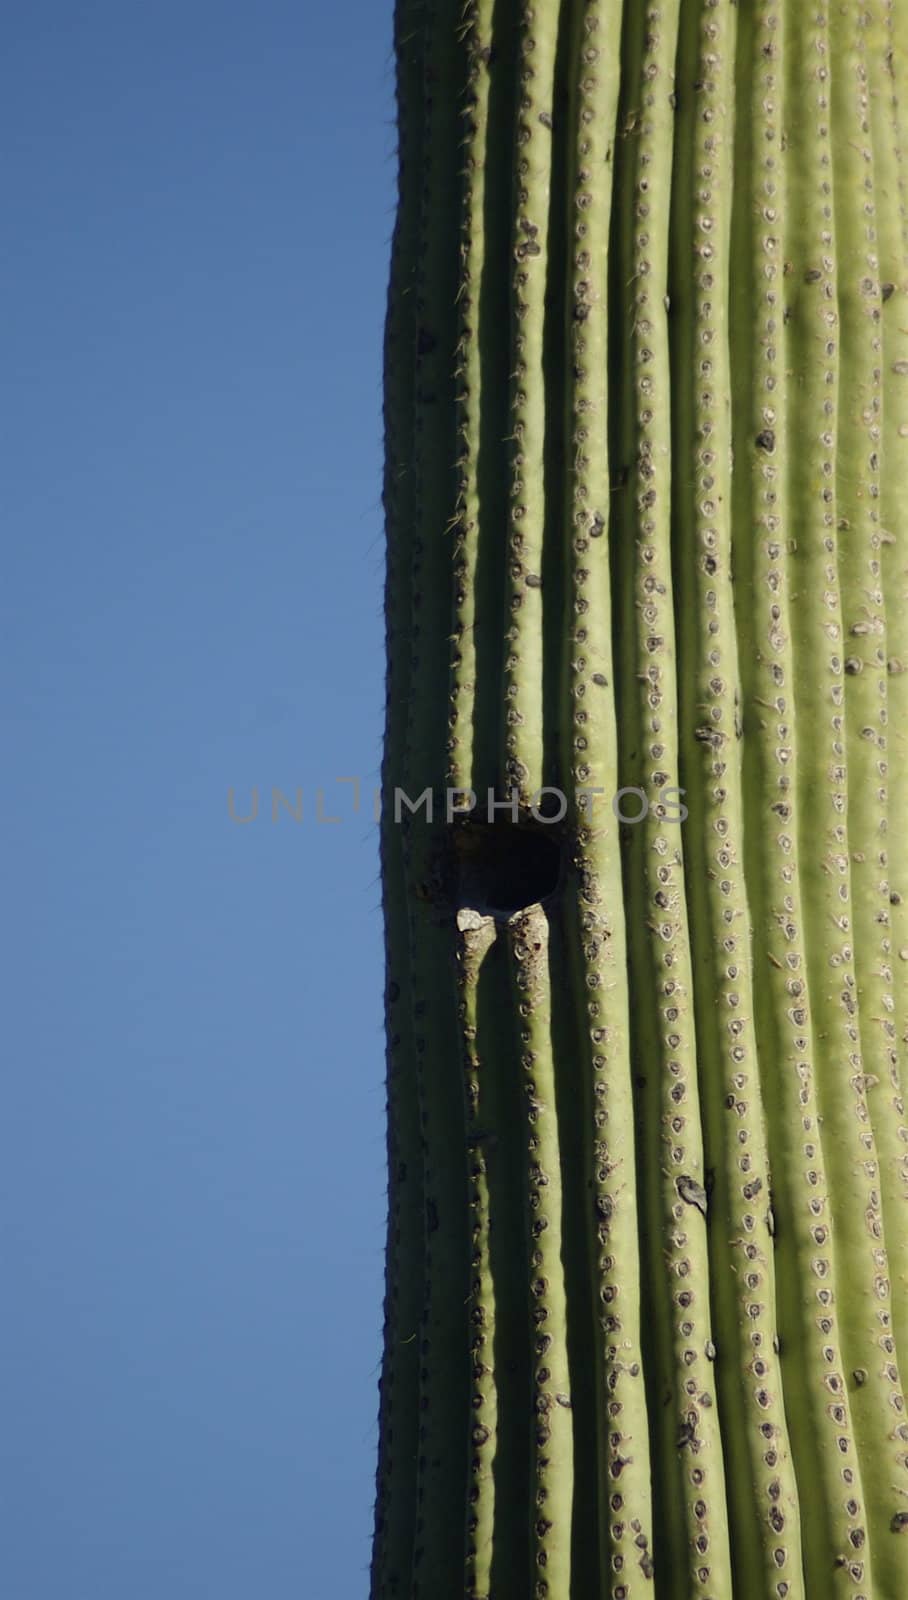 Vertical shot of a ridged cactus, featuring a bird hole in the centre, on one side, against a bright blue sky on the left hand side of the picture